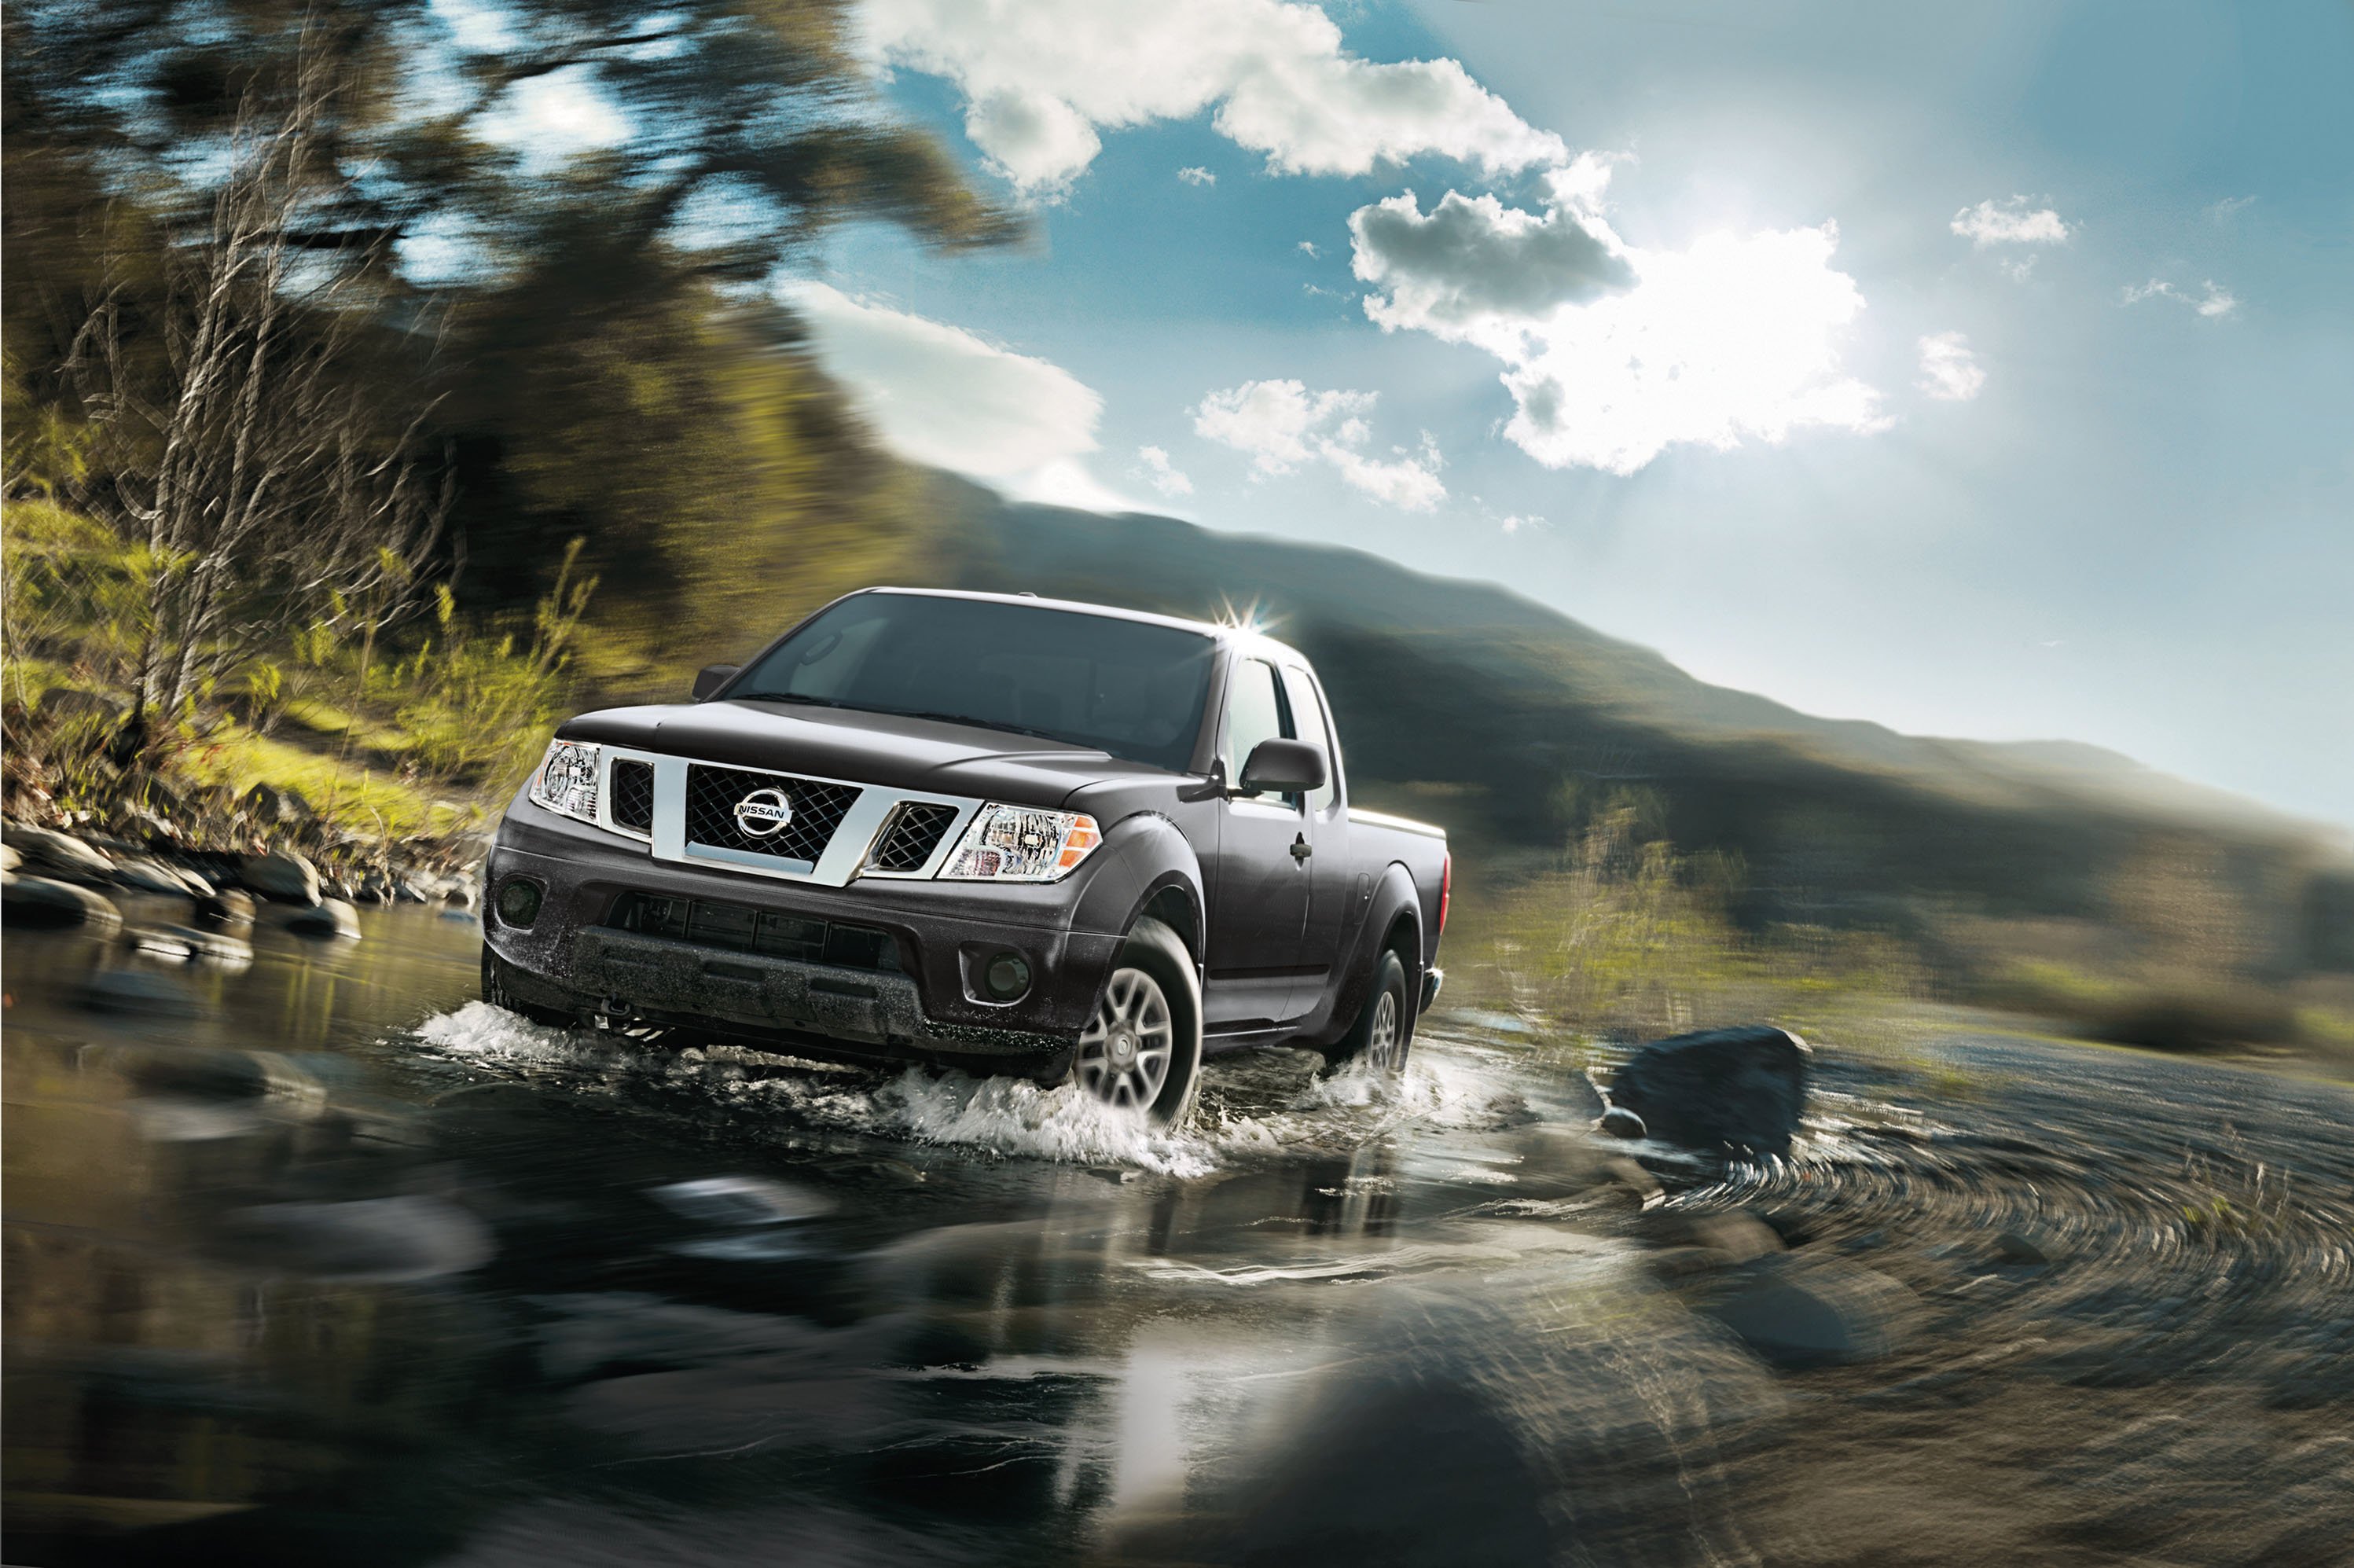 Free download 2018 Nissan Frontier Review Ratings Specs Prices and Photo [2995x1995] for your Desktop, Mobile & Tablet. Explore Nissan Trucks Wallpaper. RAM Trucks Wallpaper, Chevy Trucks Wallpaper, Classic Trucks Wallpaper